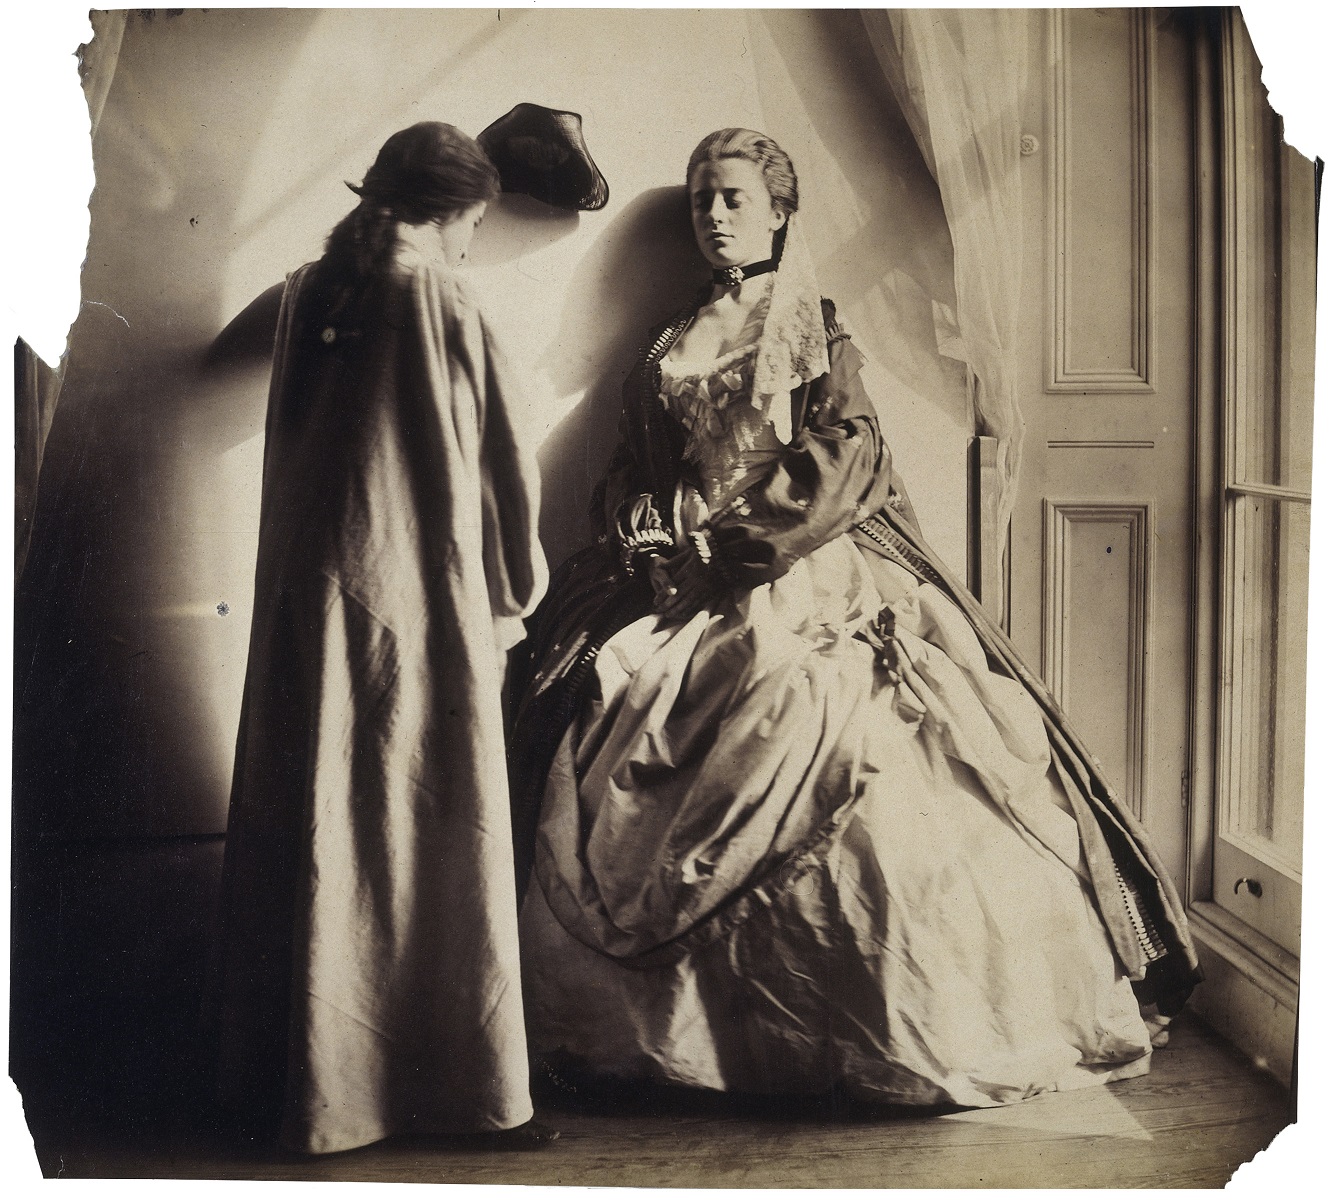 Photographic Study (Clementina and Isabella Grace Maude) by Clementina Hawarden, 1863-4